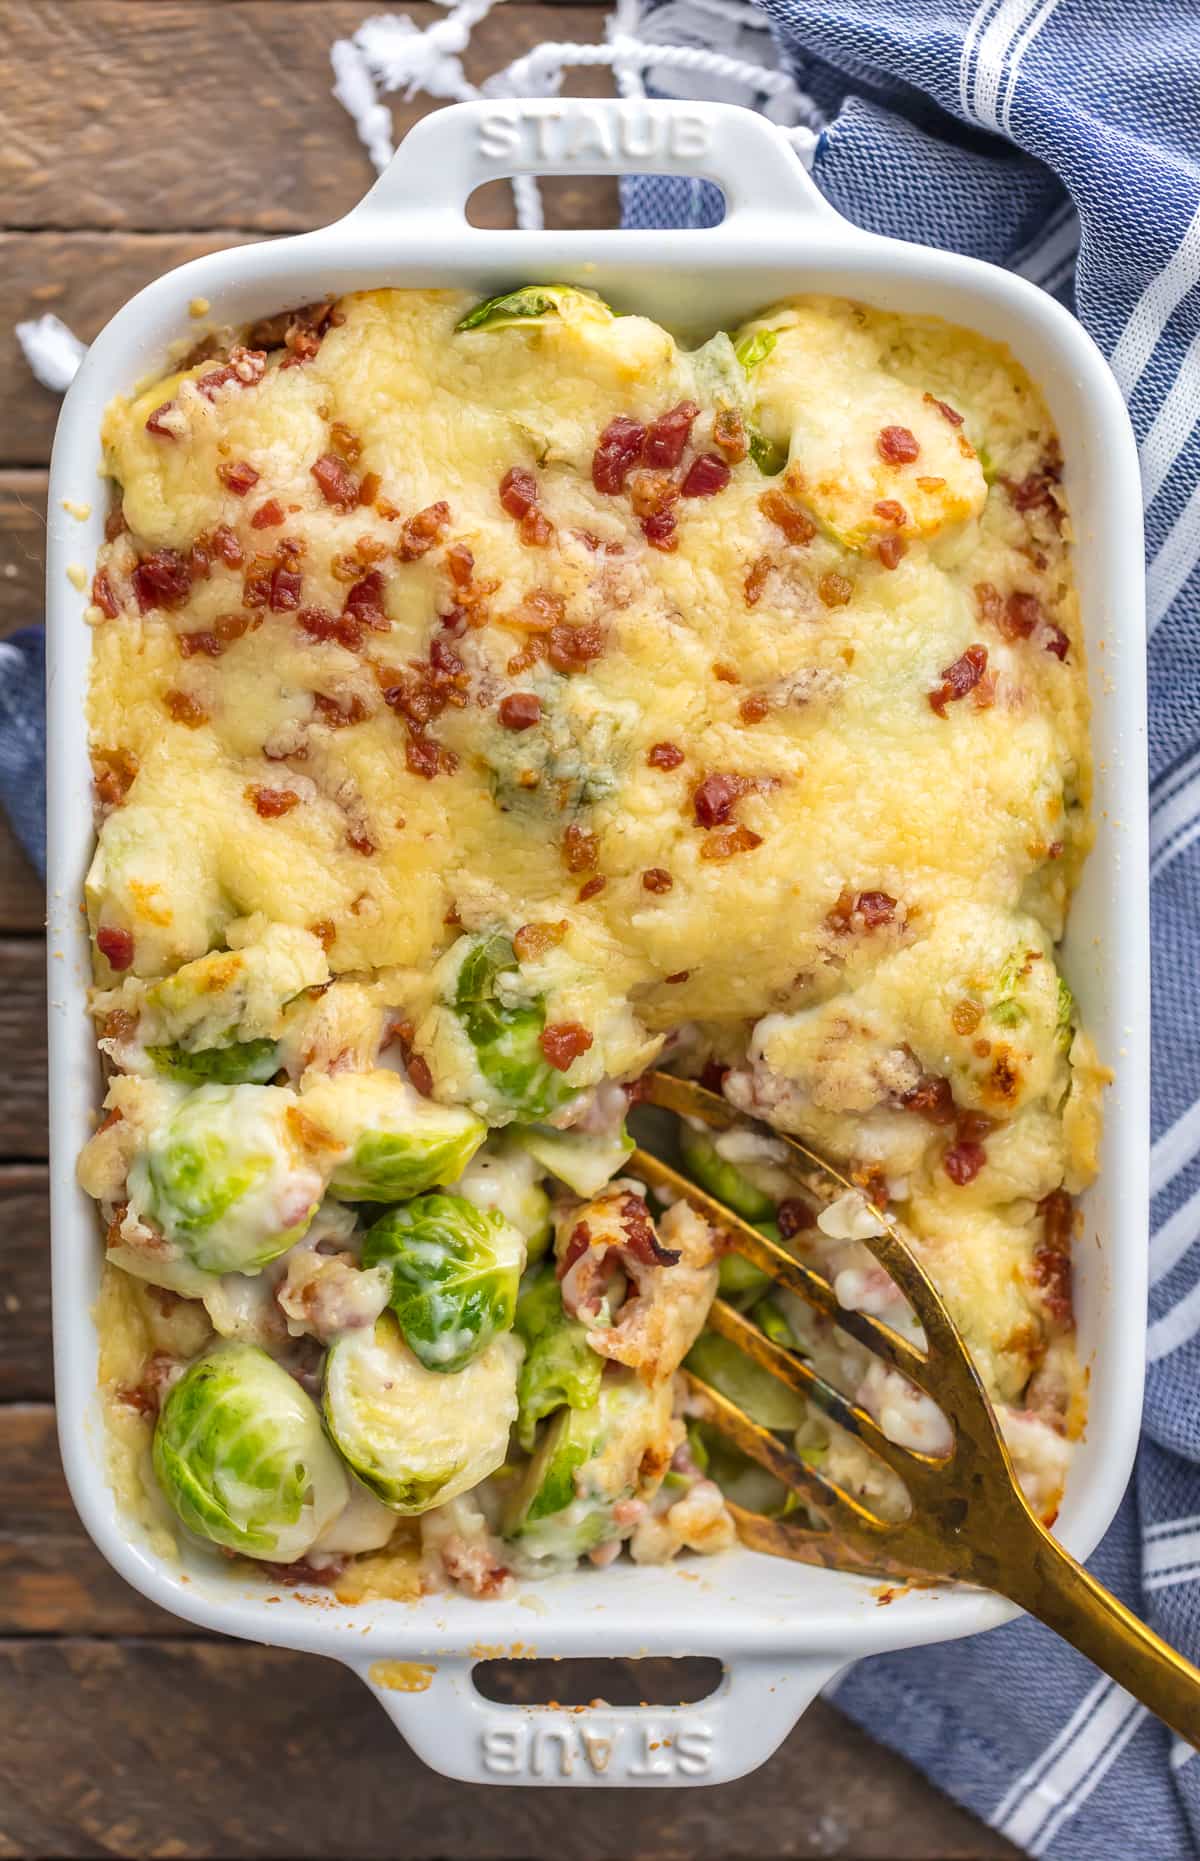 BRUSSELS SPROUT GRATIN with BACON is the ultimate holiday side dish! Who can resist brussels sprouts when sprinkled with bacon and SO MUCH CHEESE! The cream sauce inside is so easy and delicious, making this a Thanksgiving favorite for our family.